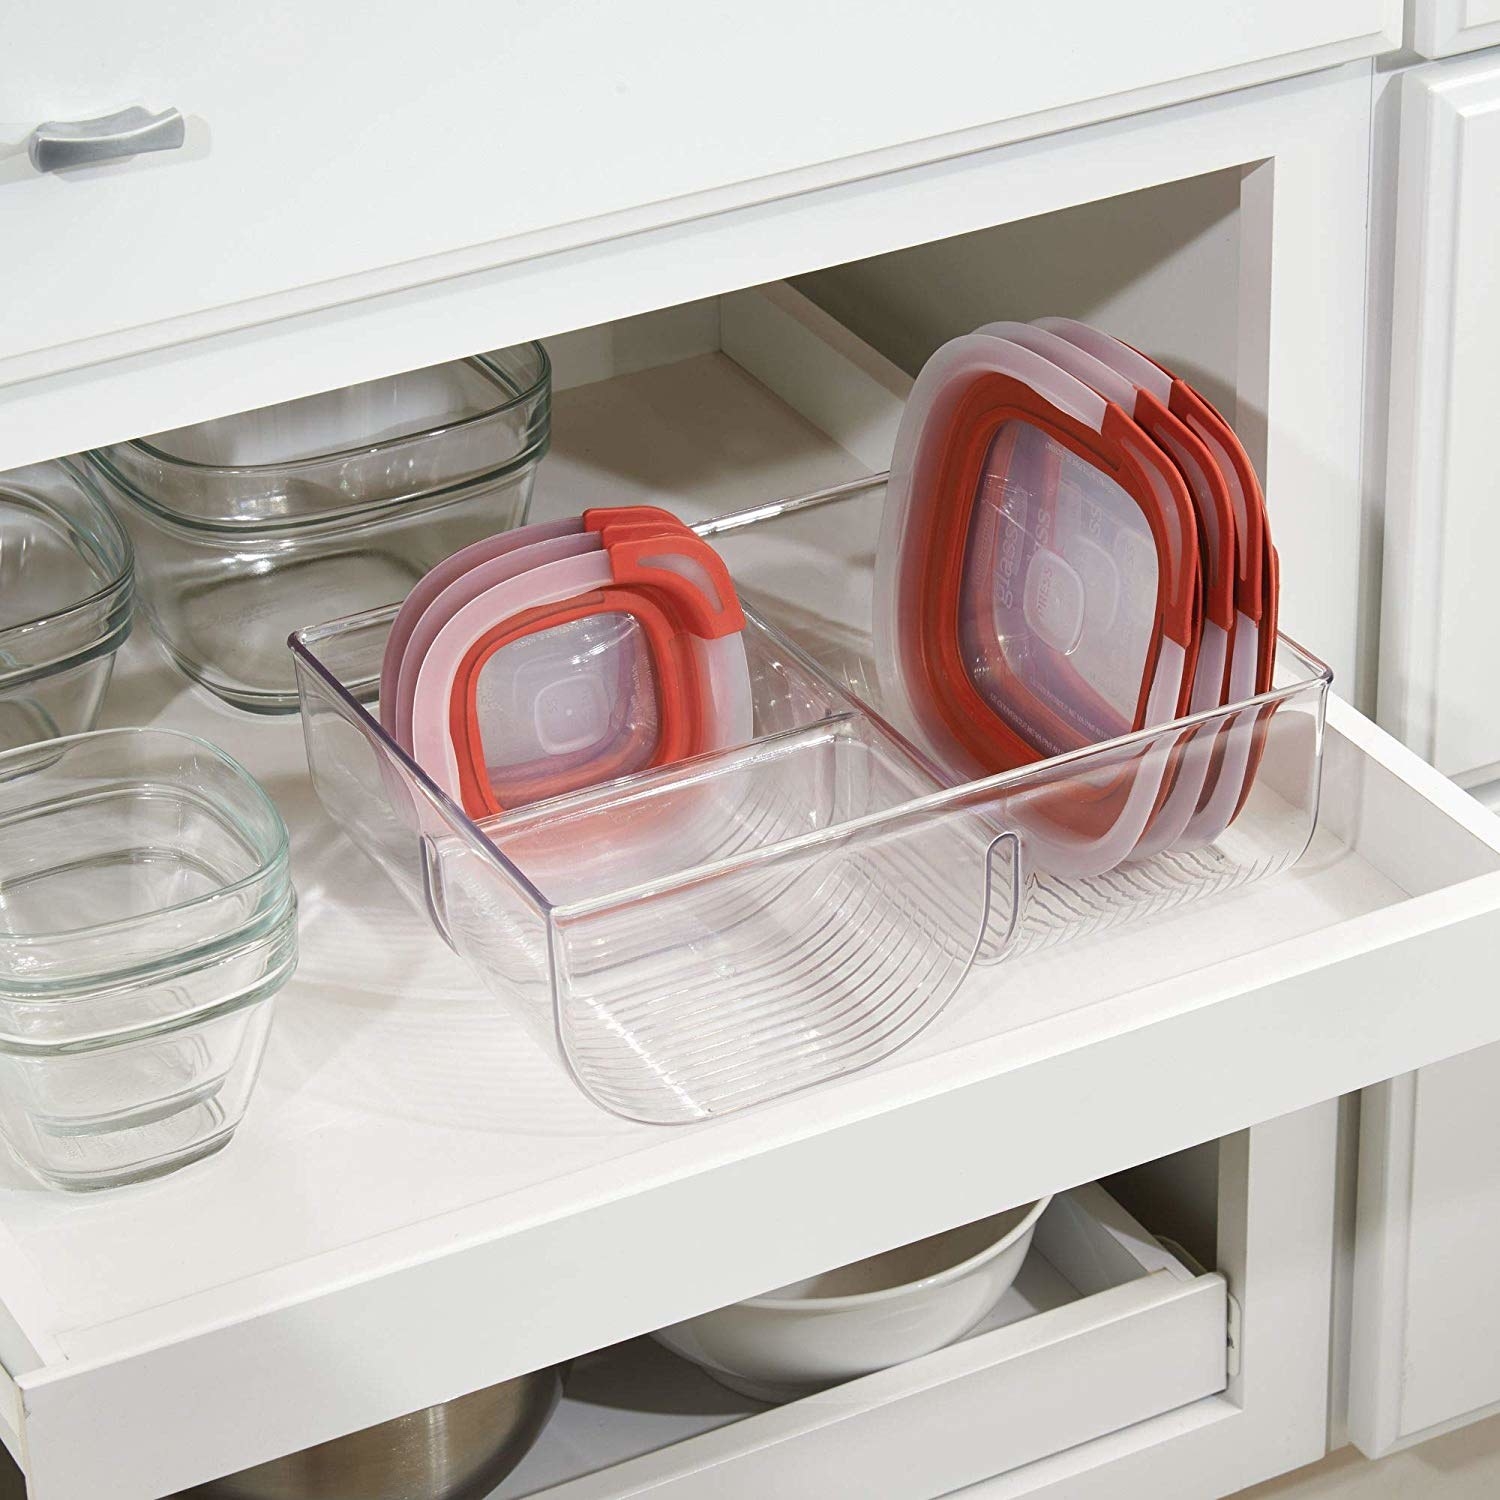 open kitchen storage drawer with visible food storage containers and the featured translucent organizer with notched slots to help file the storage lids